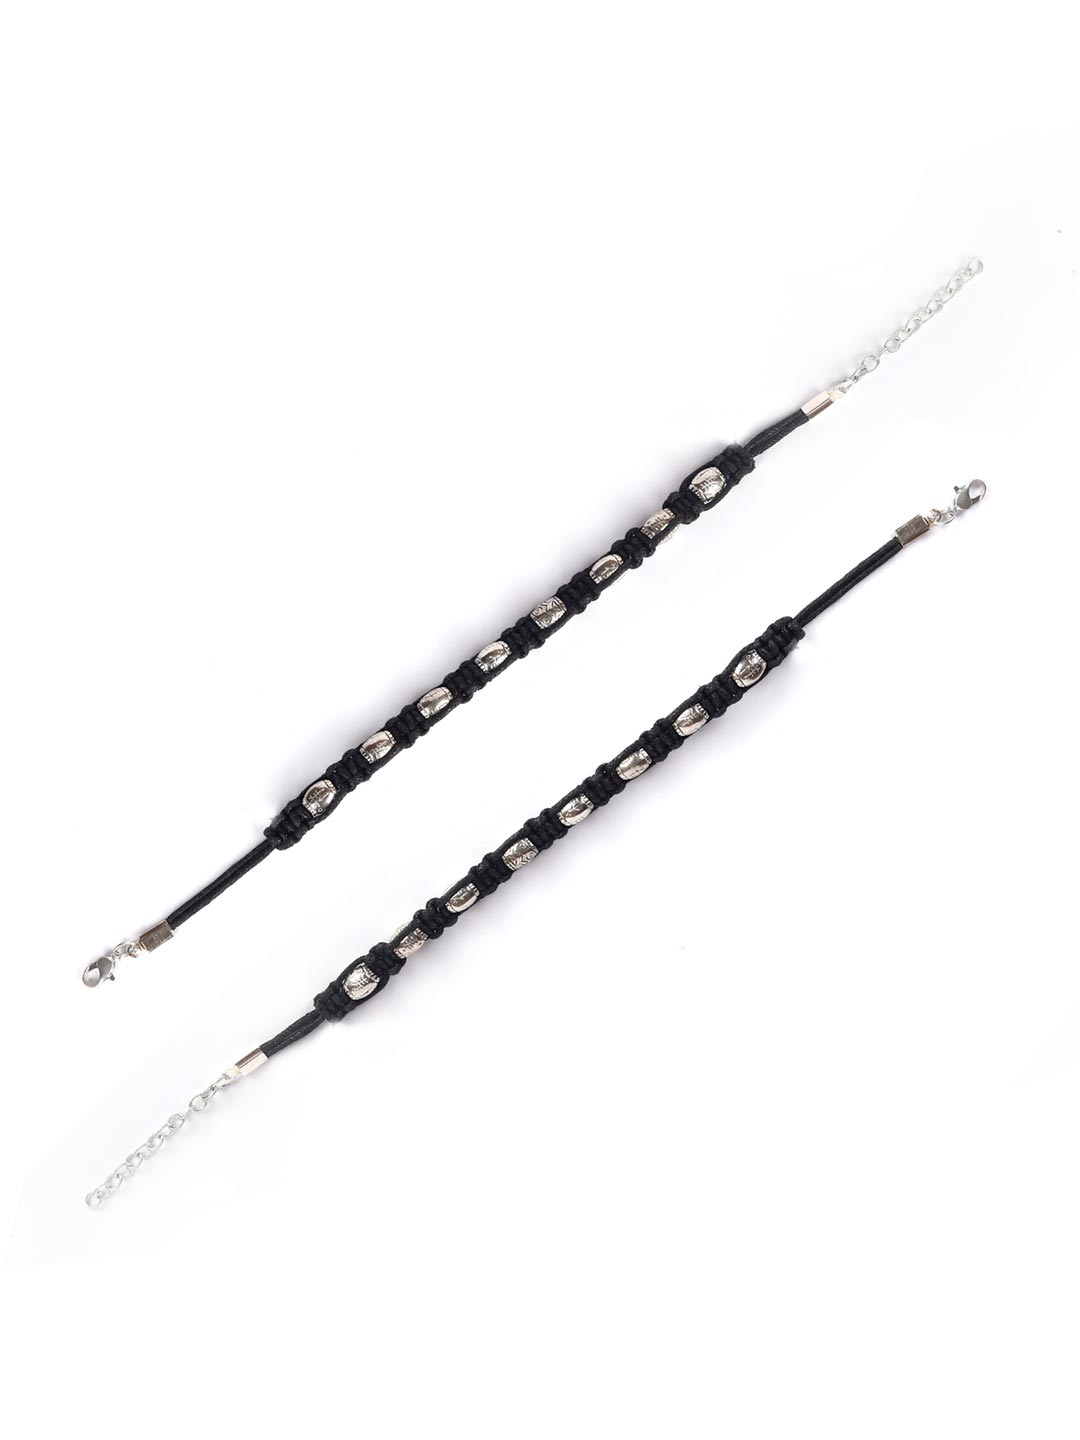 Black Thread Beads Silver Plated Traditional Anklets